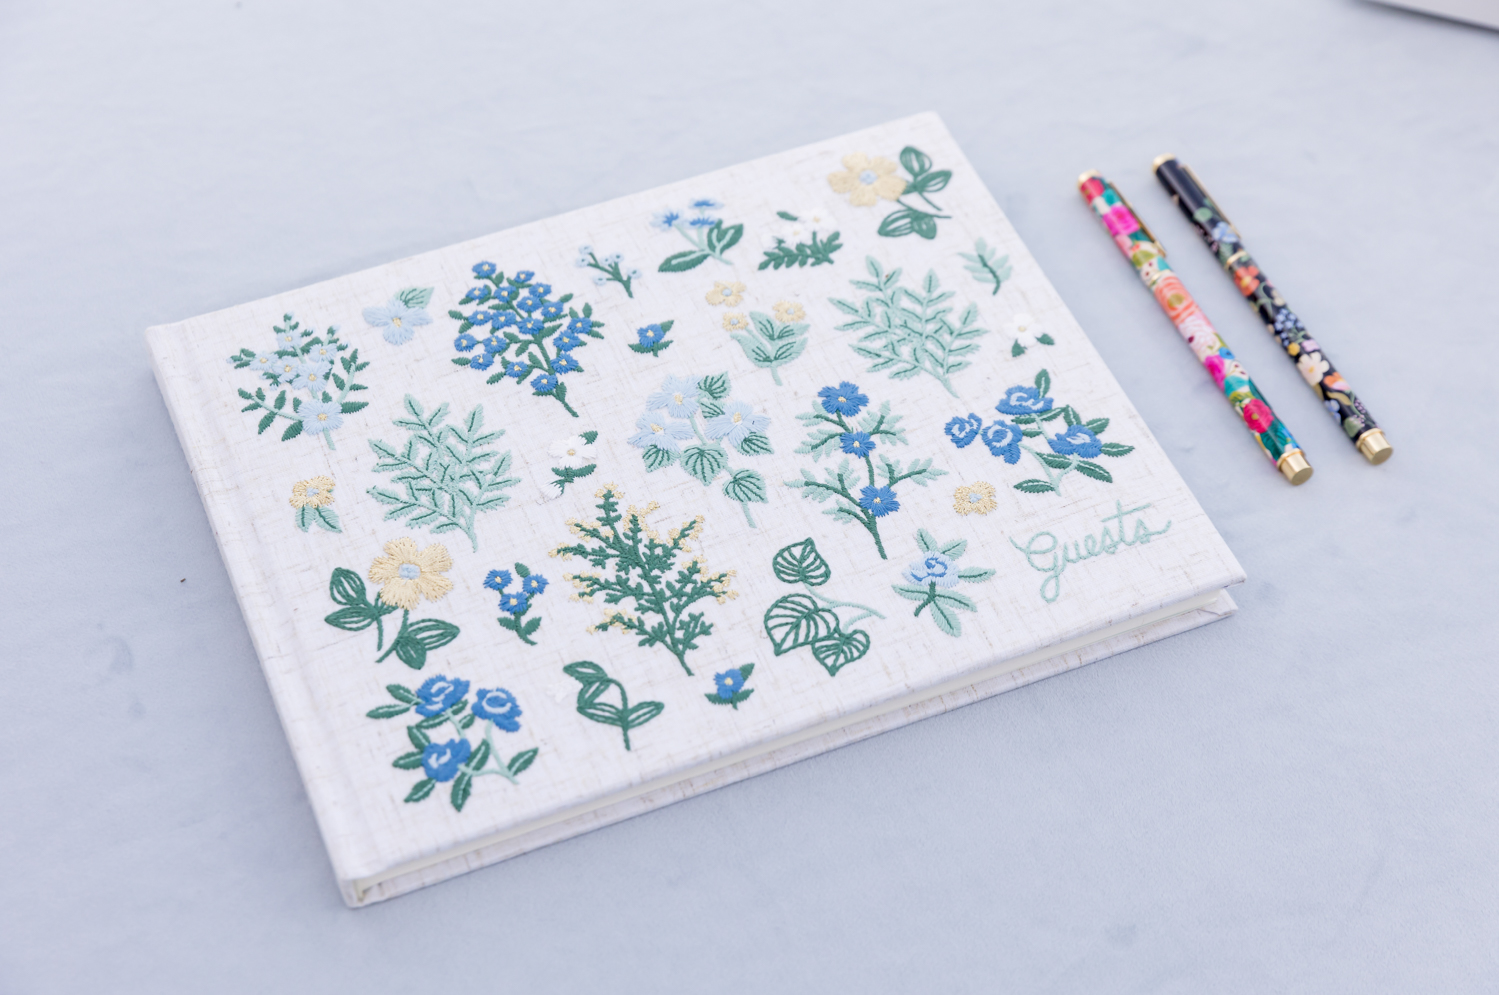 A guest book with blue flowers embroidered on the cover waiting for guests to sign